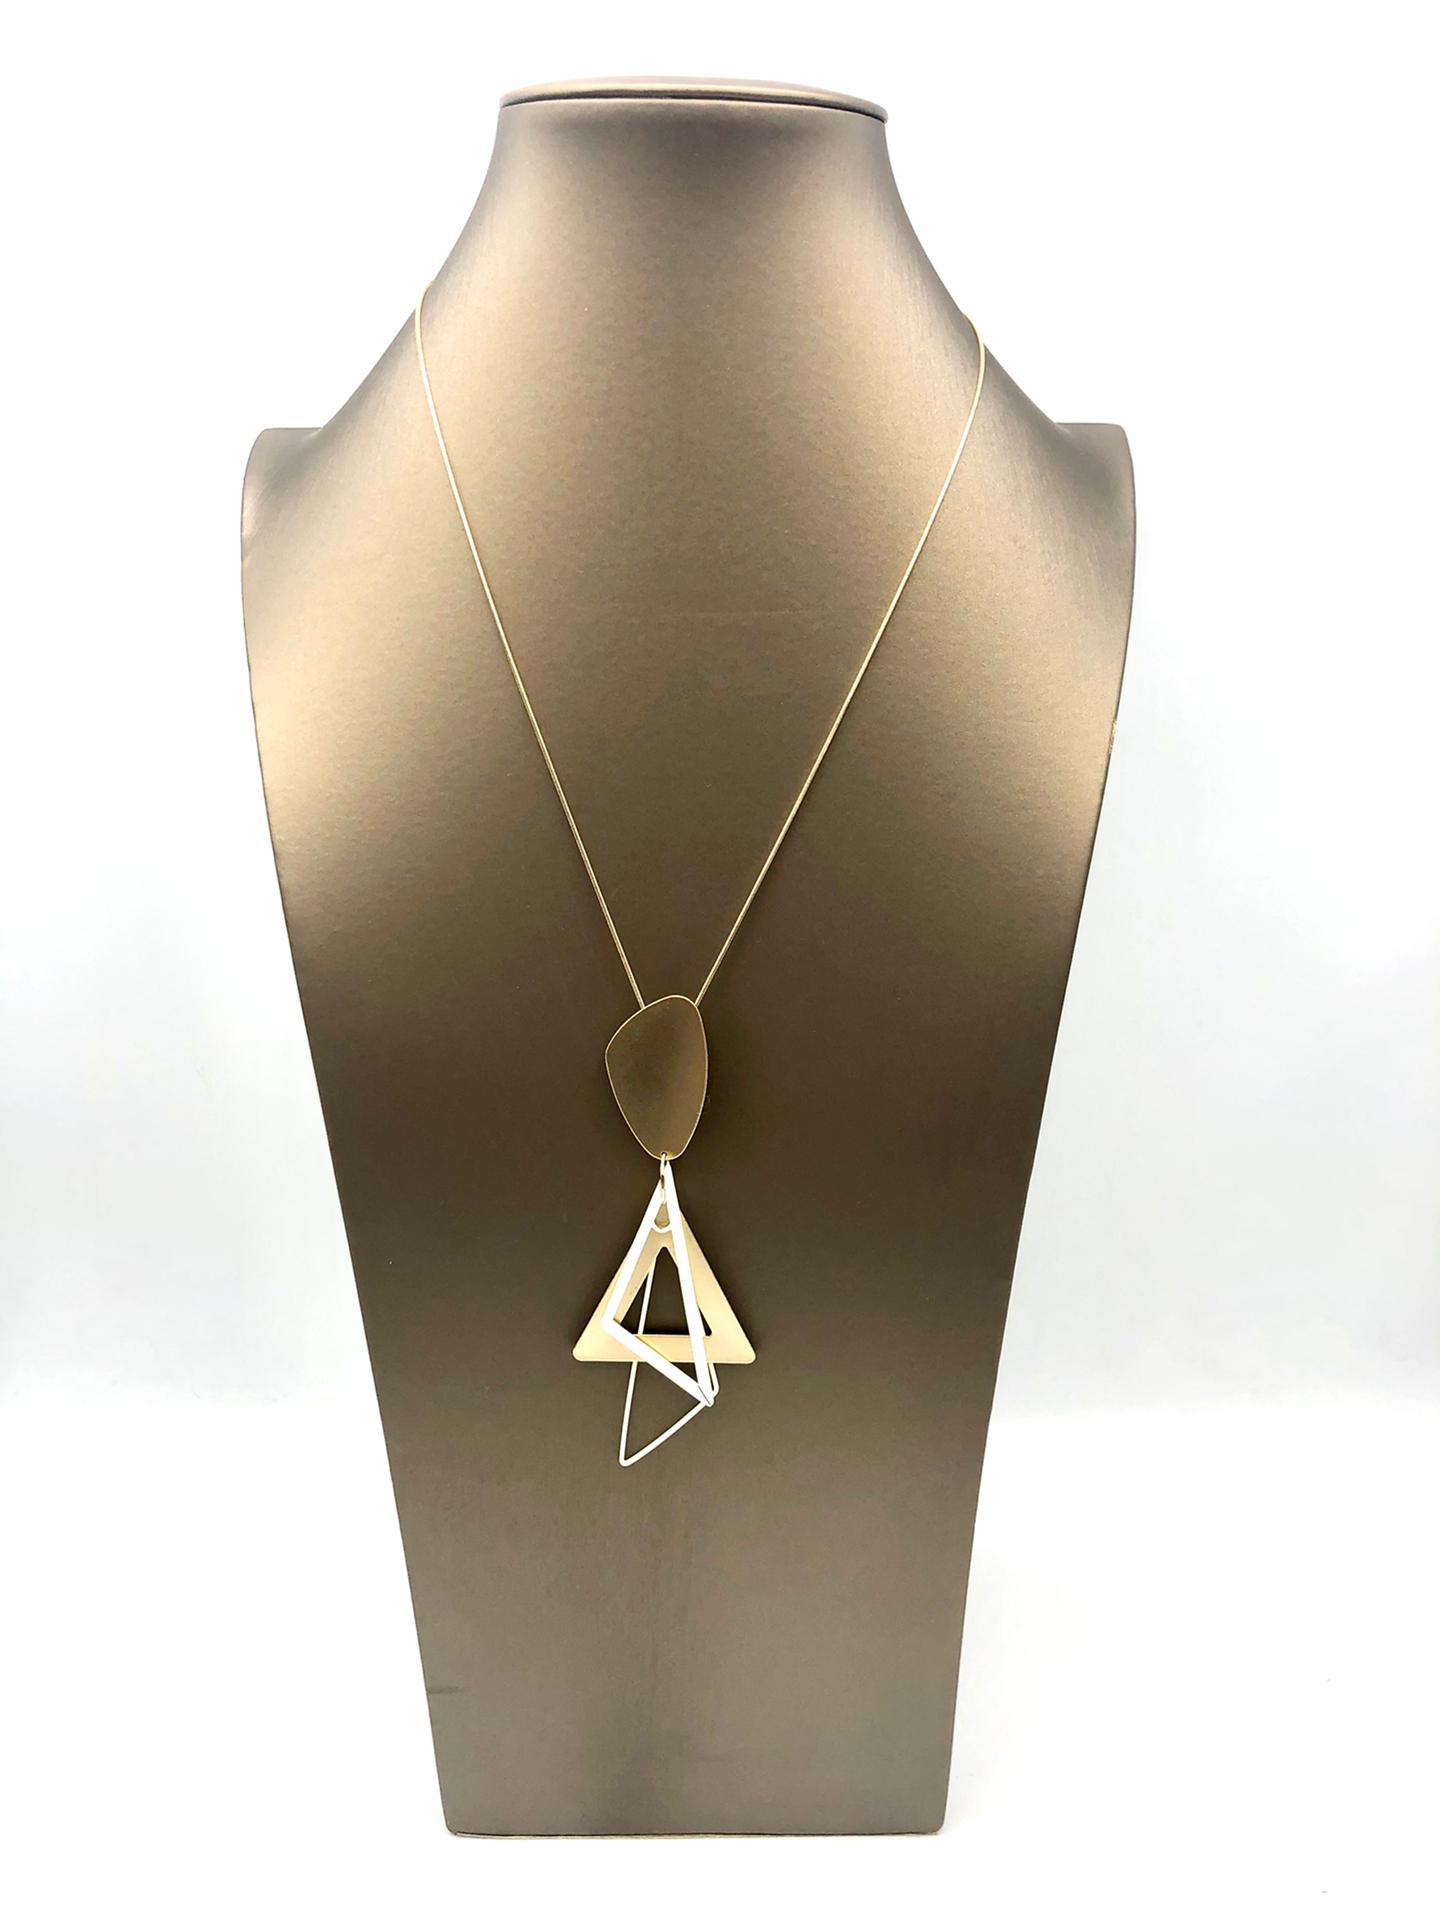 Halsketting Triangle zilver lang